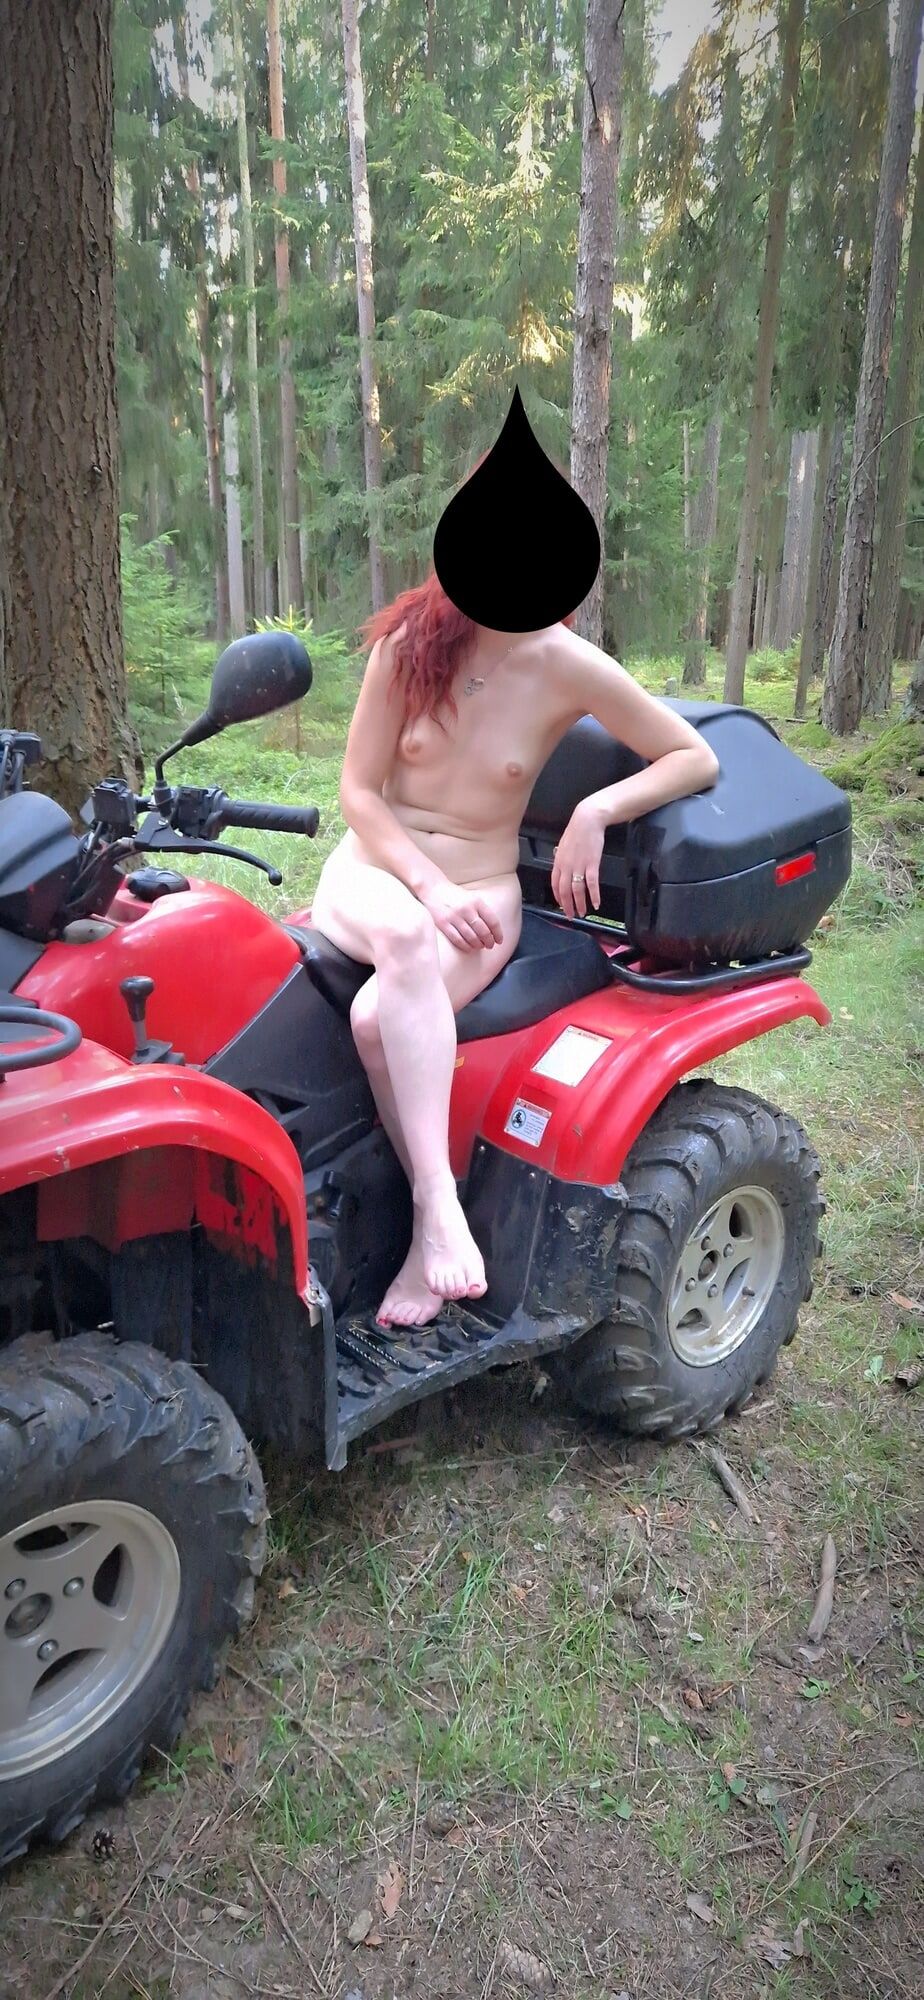  Take pictures and have sex in the forest on a quad bike